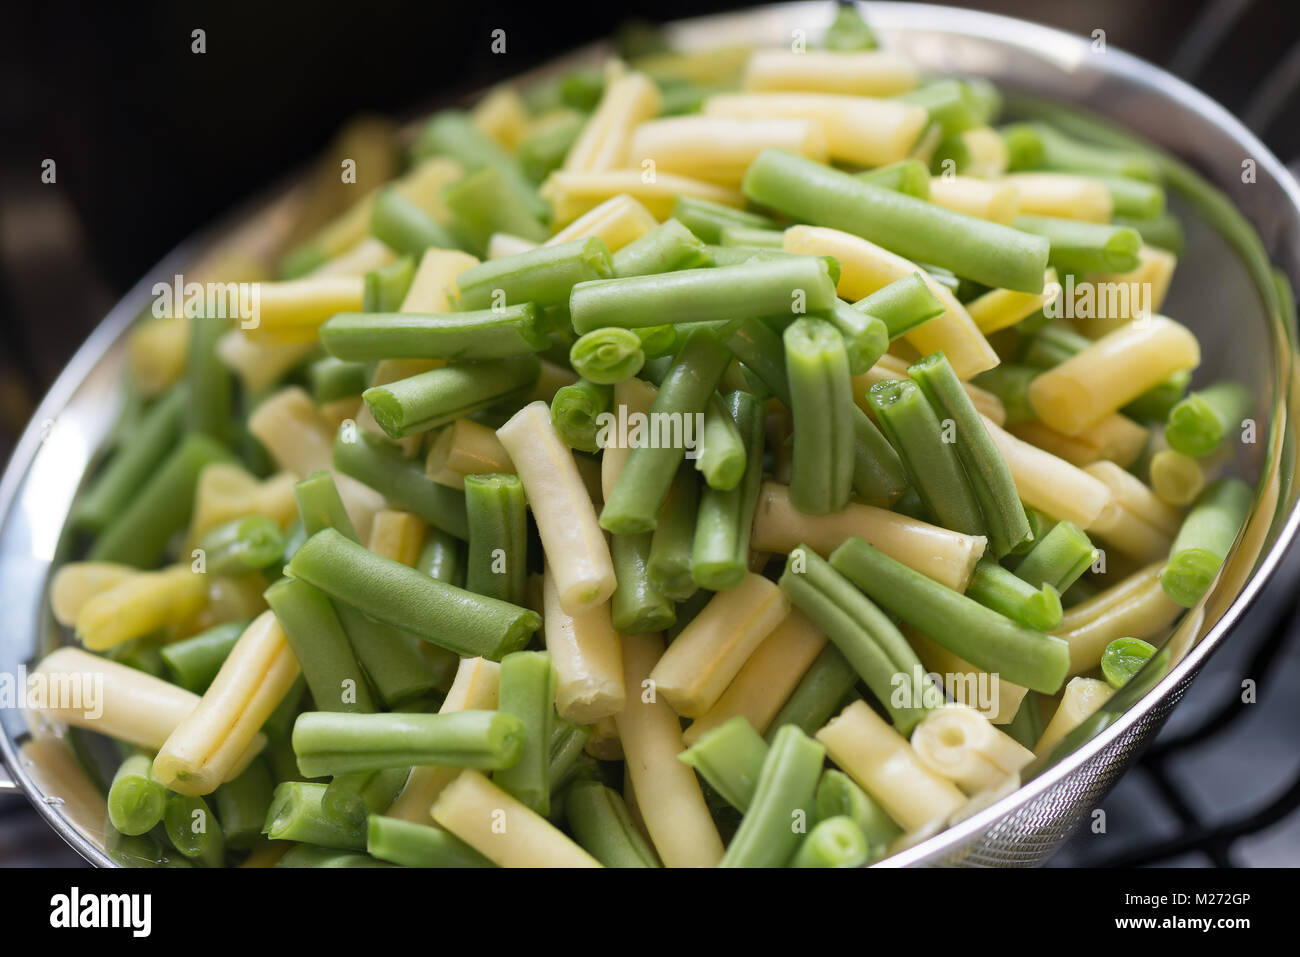 Wax and Green Beans in a strainer Stock Photo